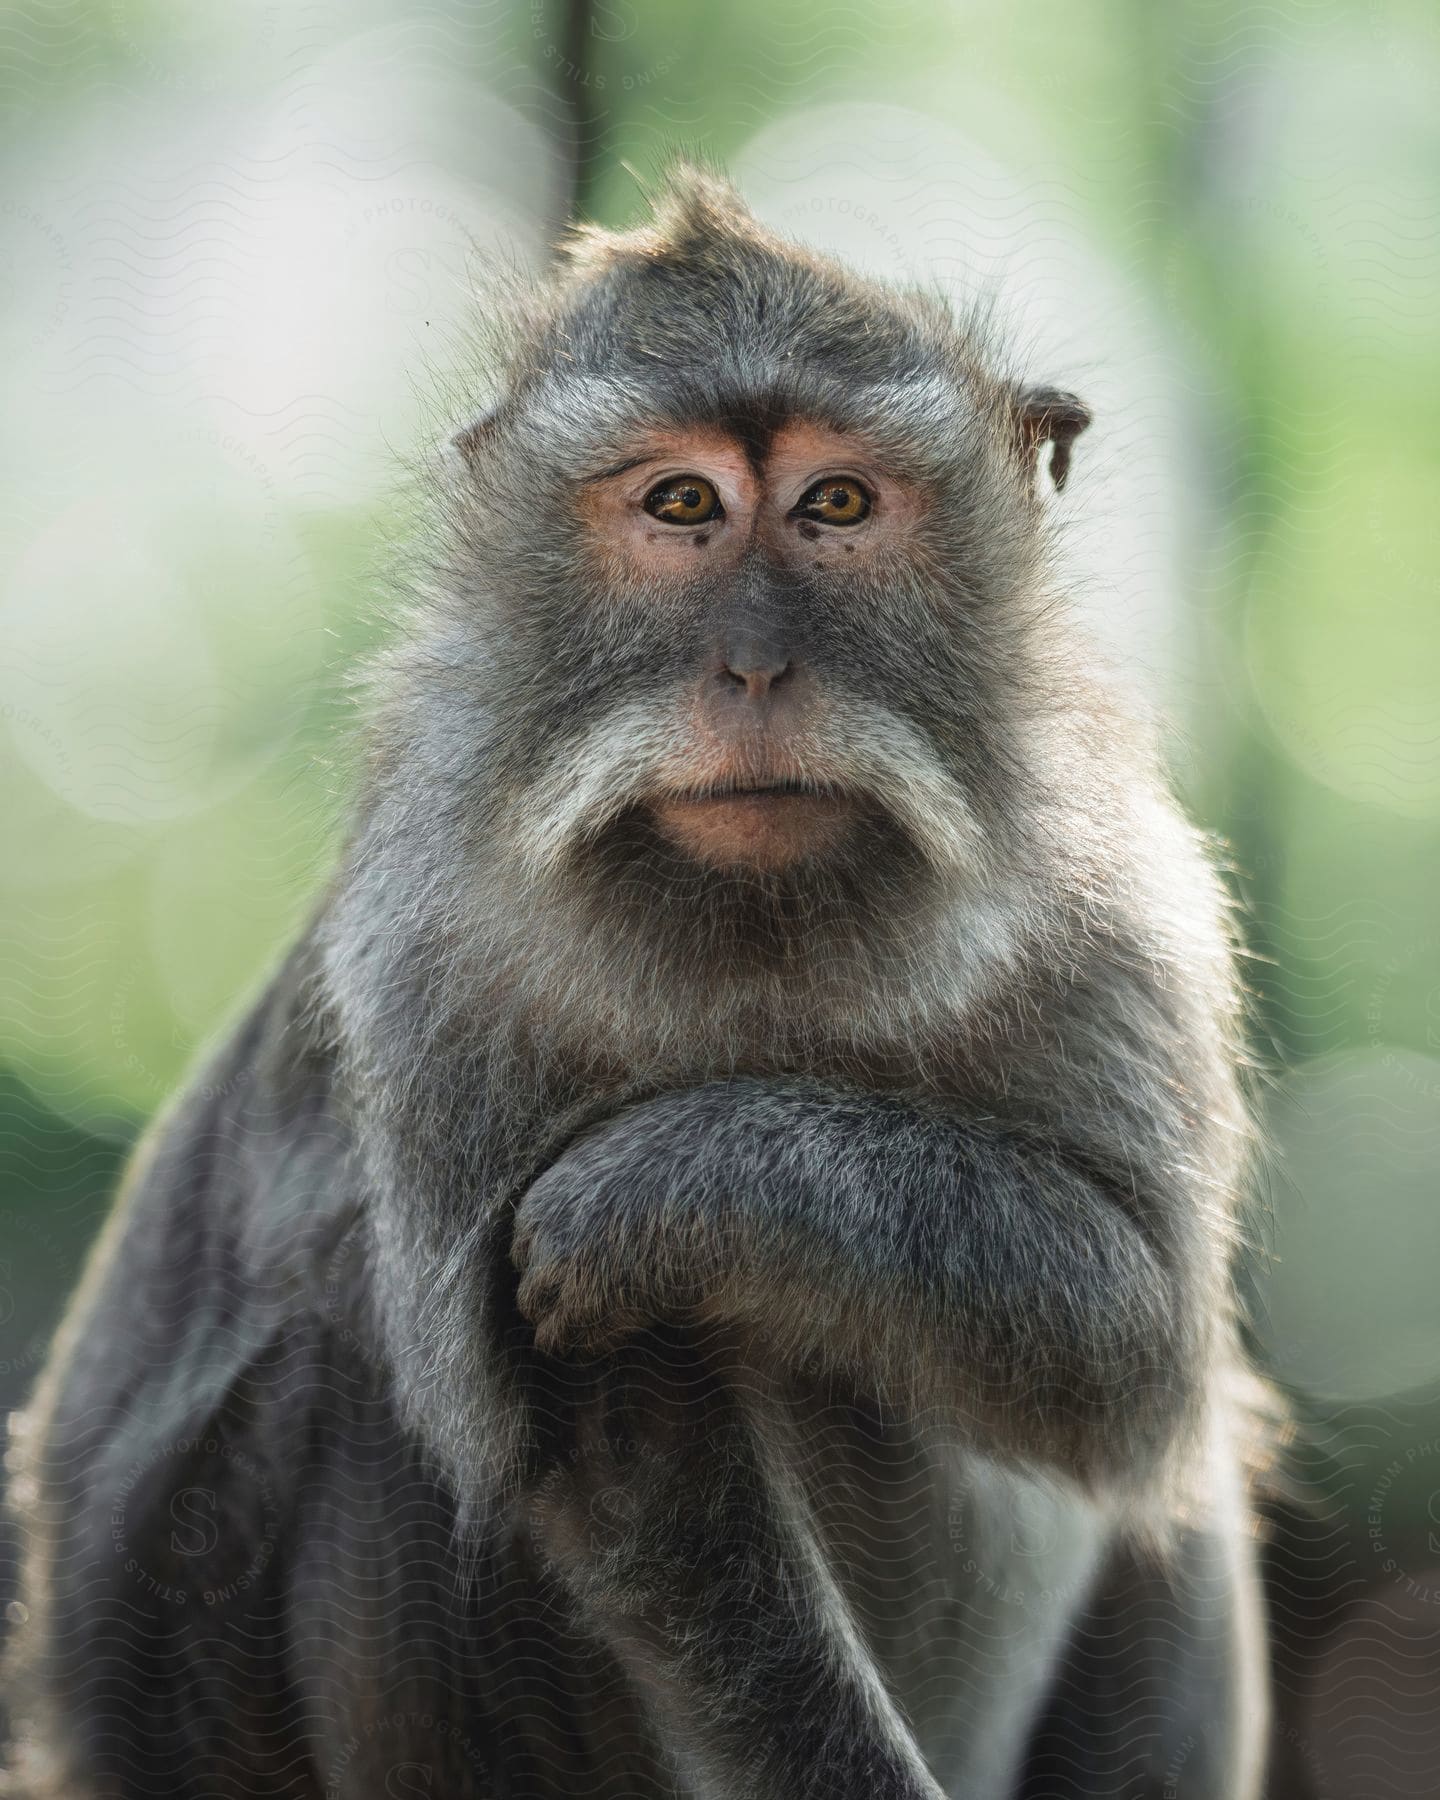 A macaque sitting on the ground, looking around.